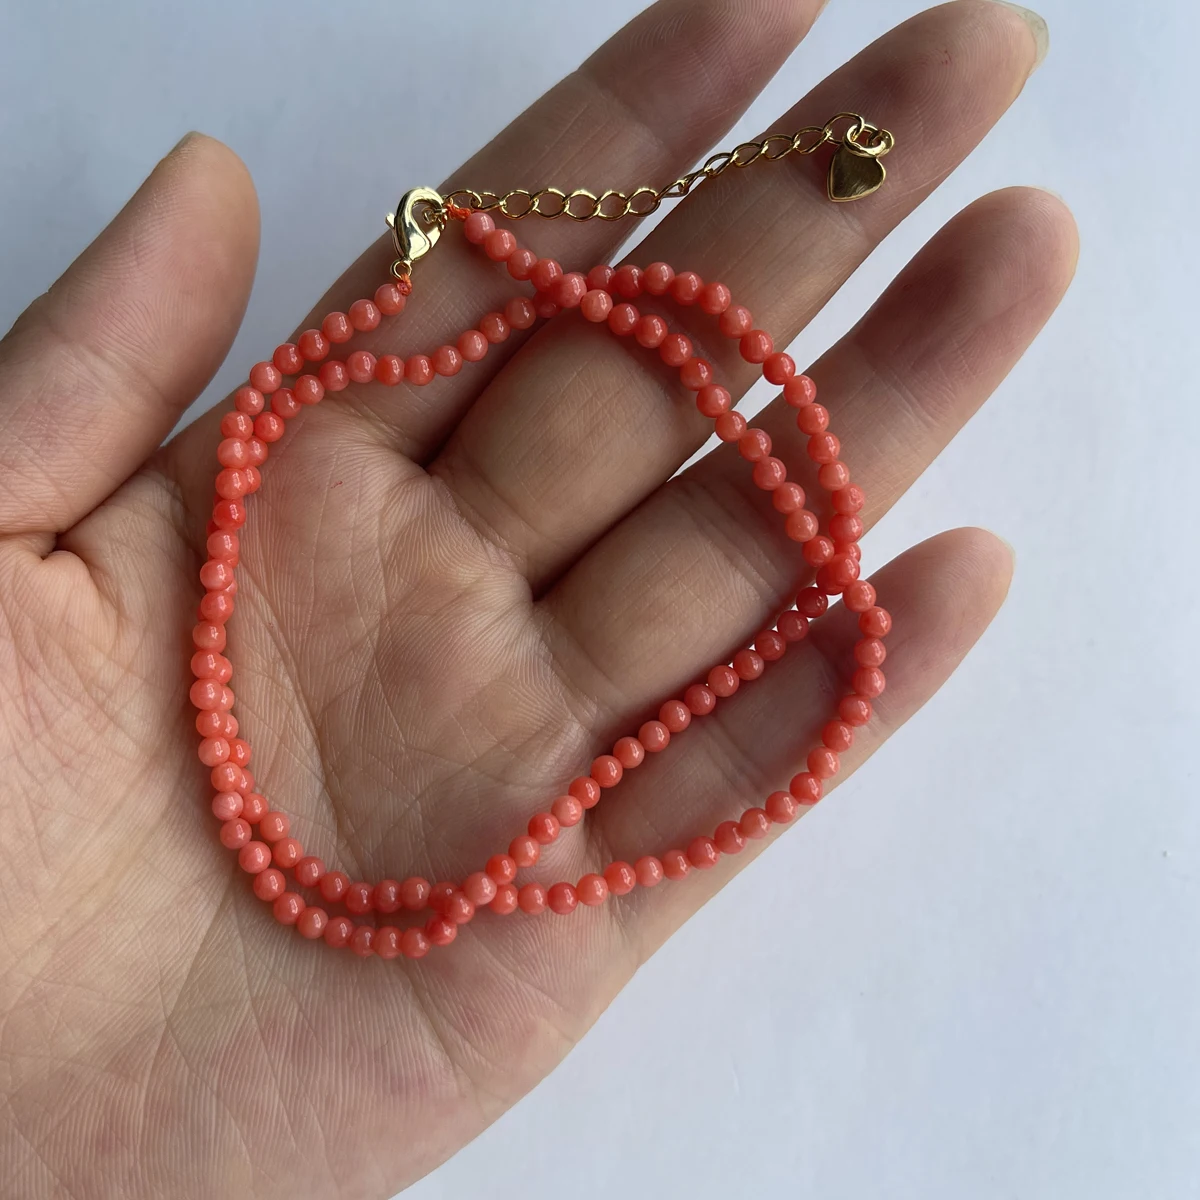 

3mm Fine Natural Coral Beads Loose Round Spacer Bead for Fashion Jewelry Making DIY Necklace Bracelet Accessories